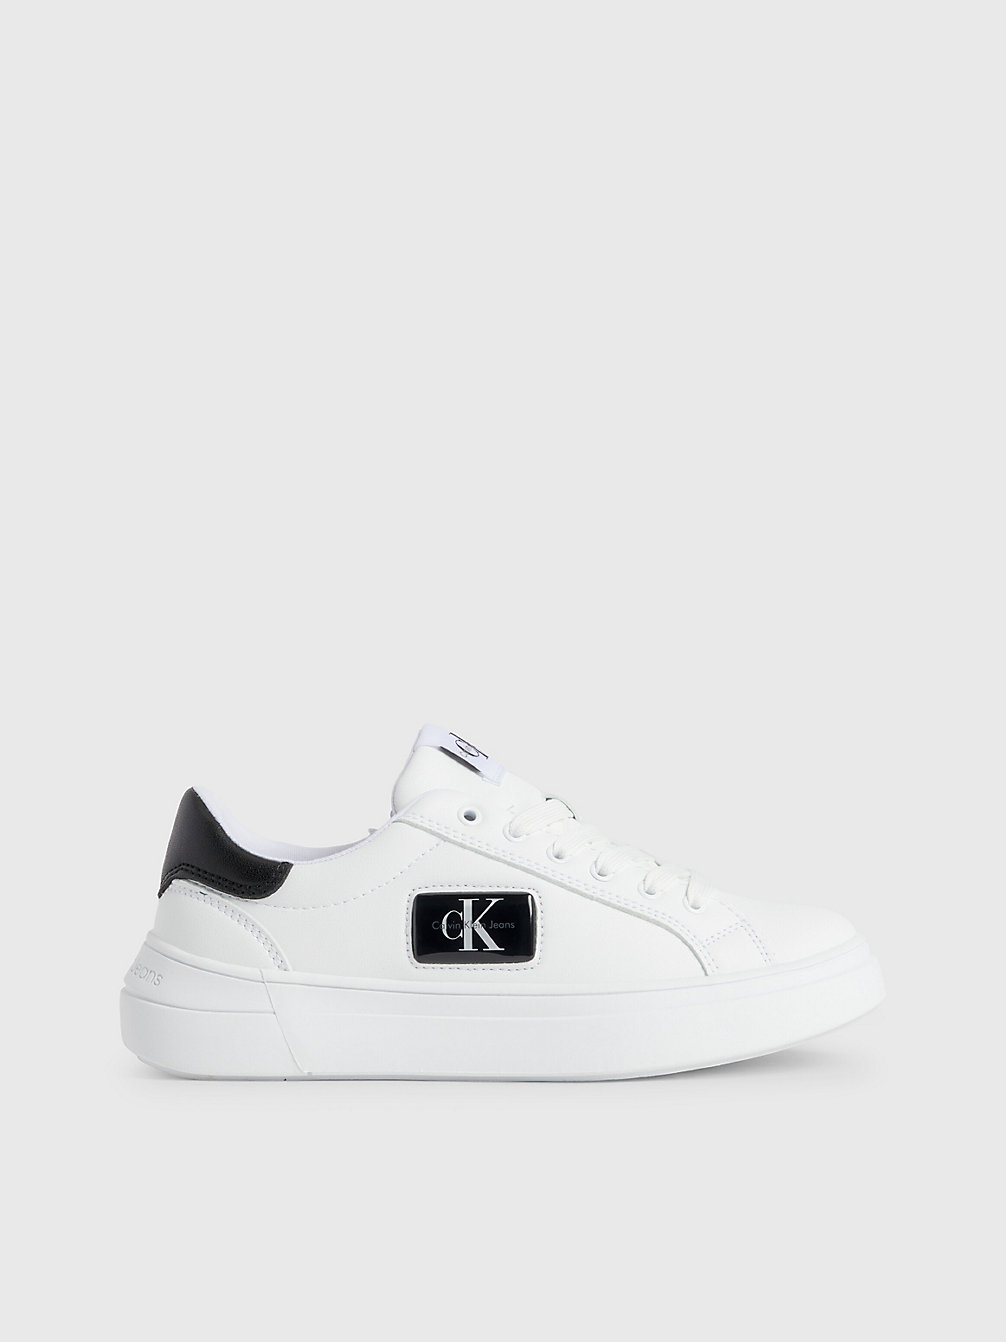 WHITE / BLACK Kids Recycled Trainers undefined kids unisex Calvin Klein